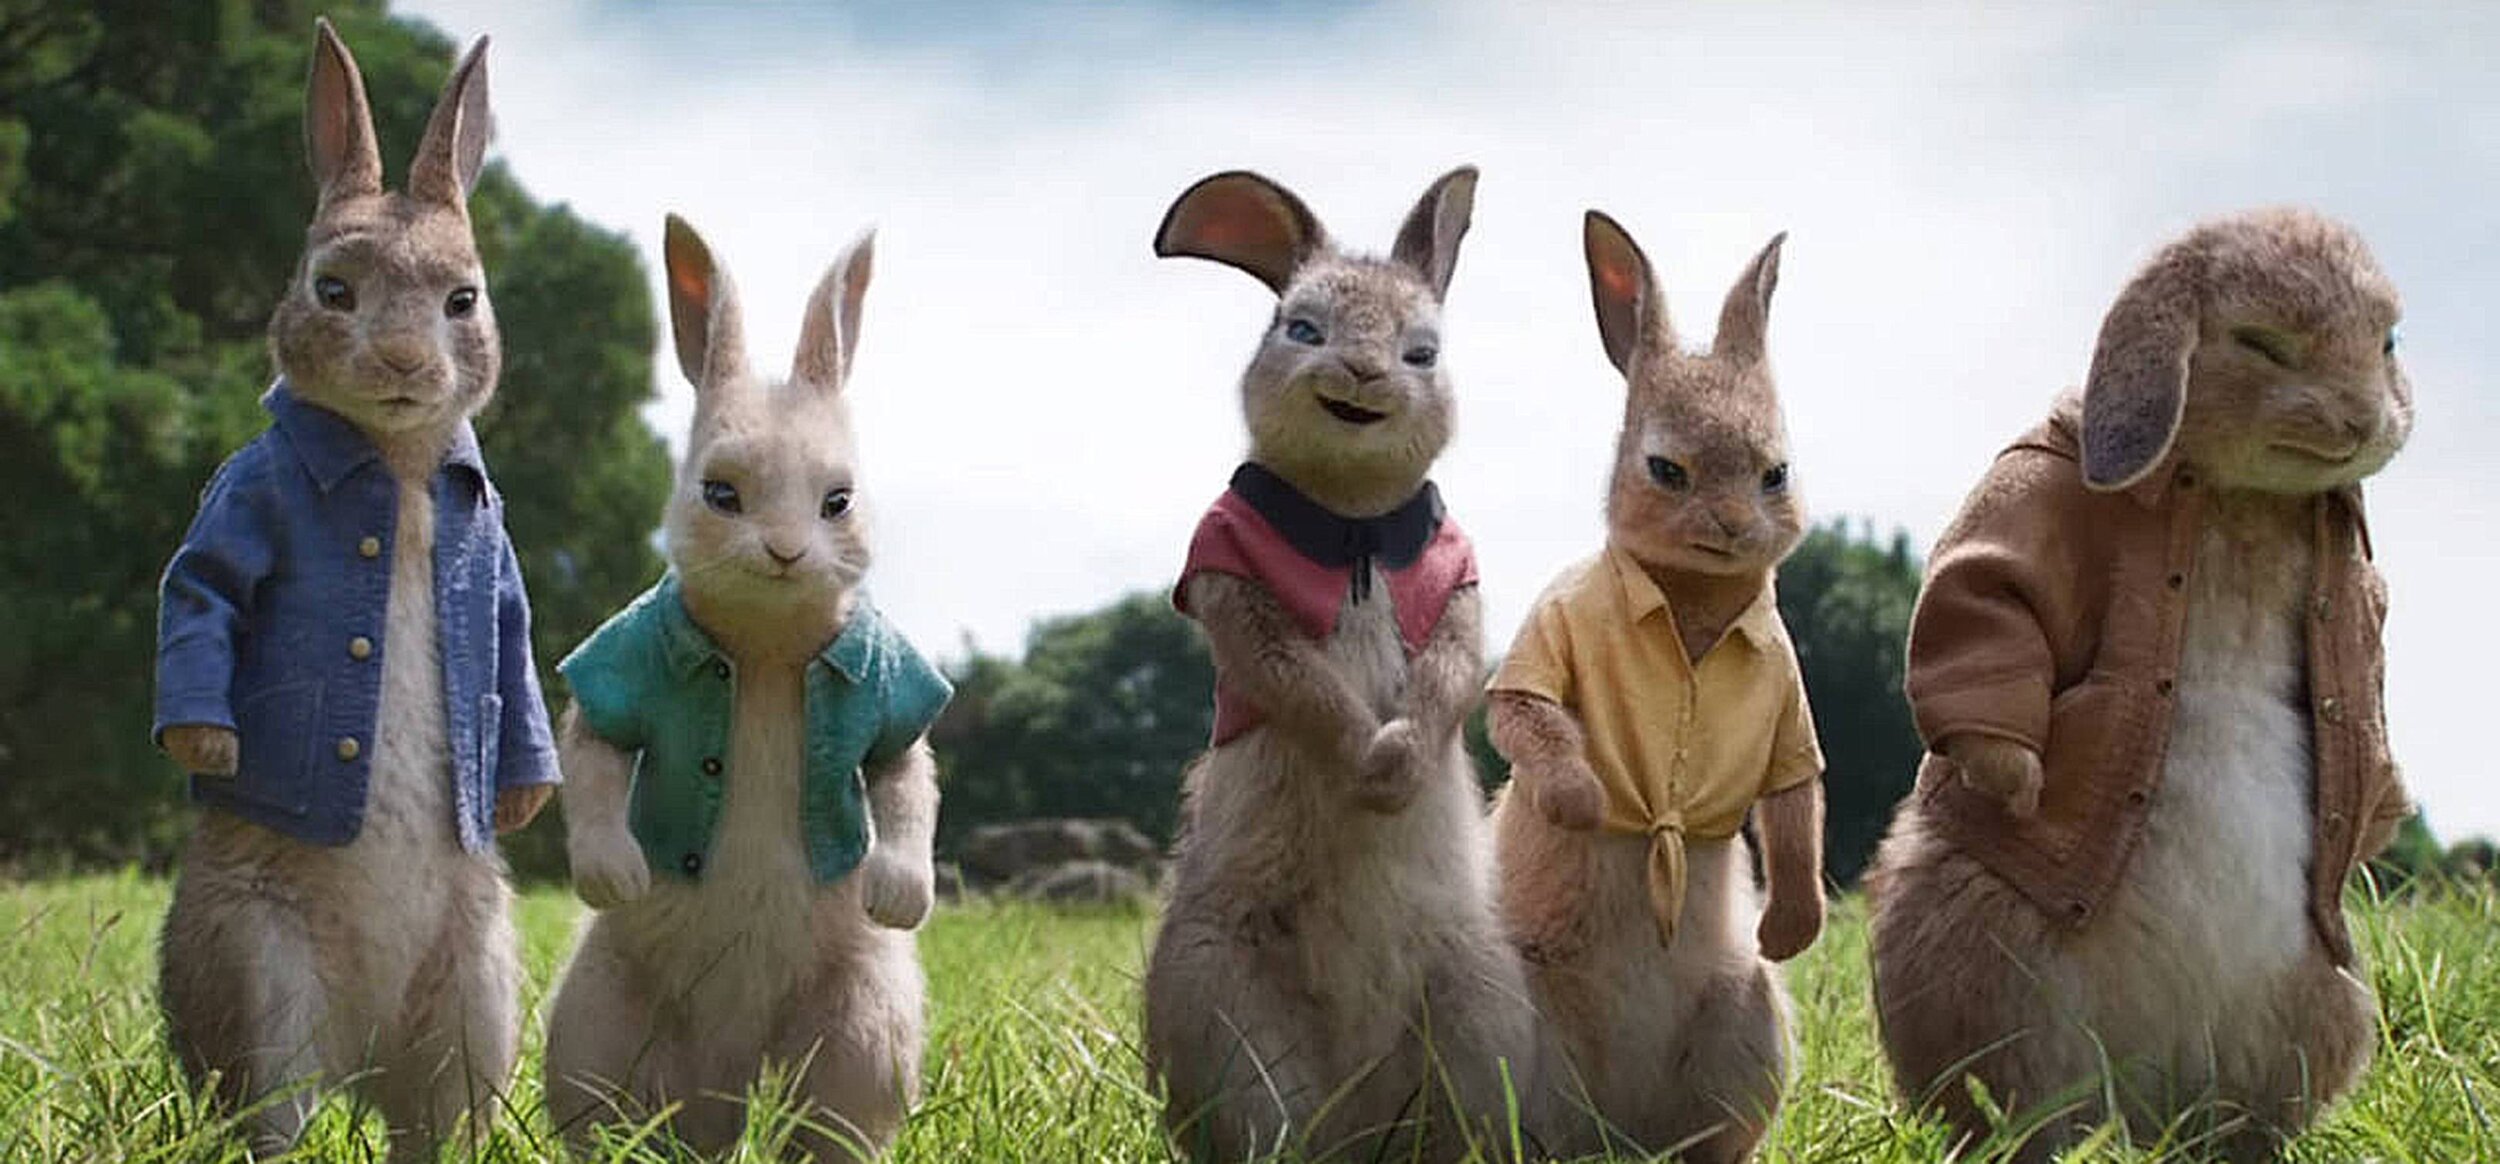 Peter Rabbit 2 - movie review - The Blurb